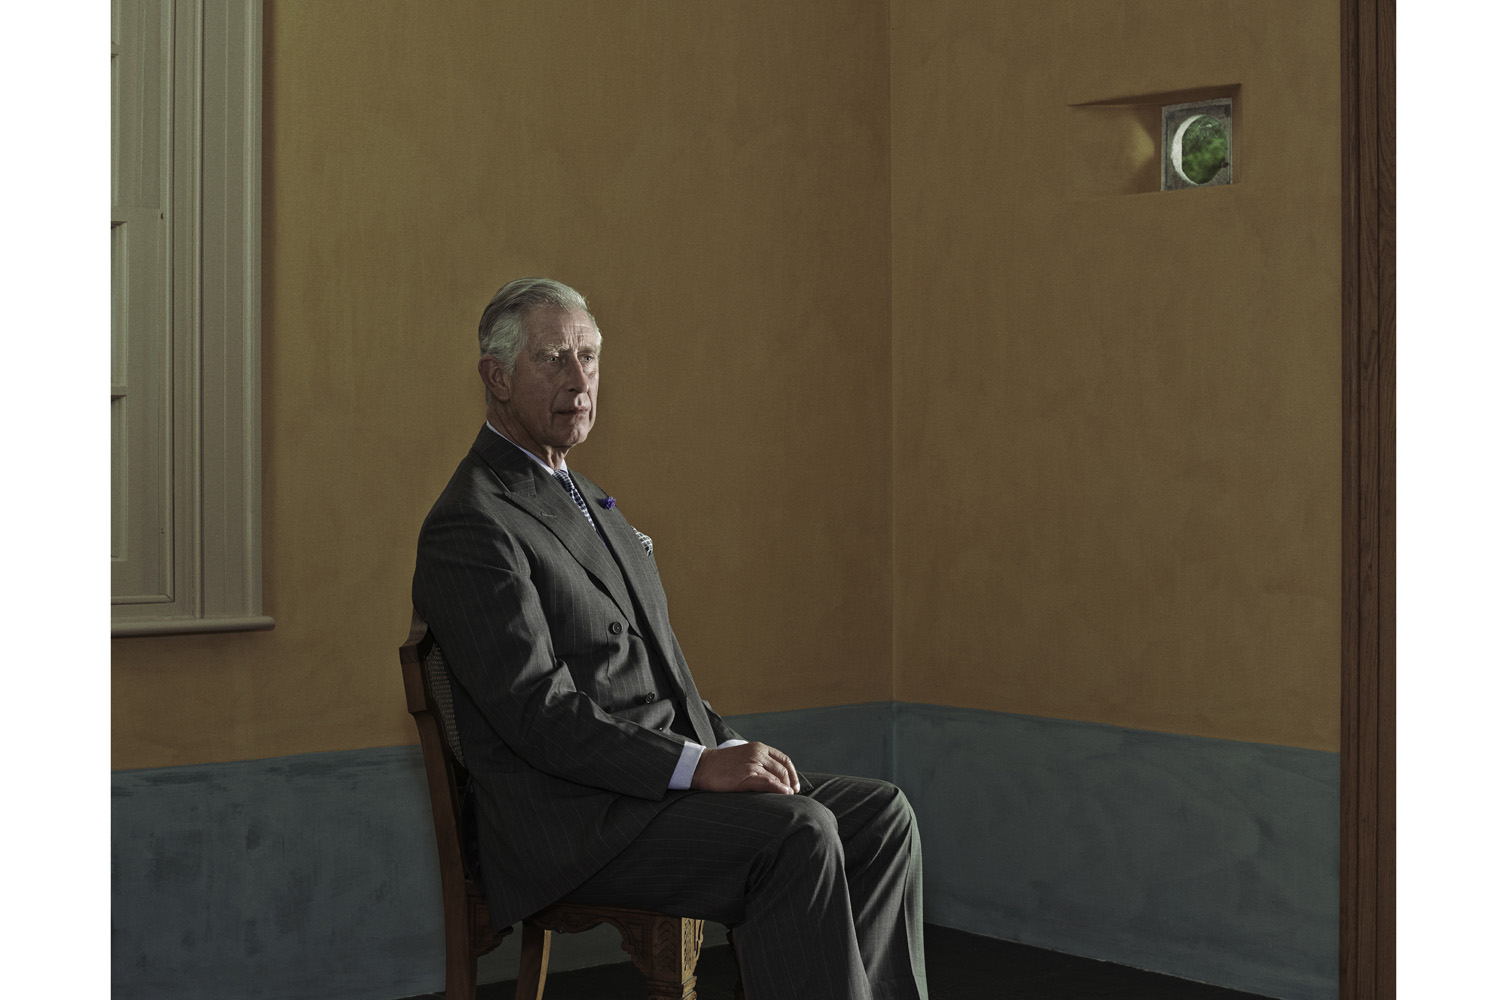 A portrait of Prince Charles taken at Birkhall, his private residence on the Balmoral estate in Scotland. 2013.